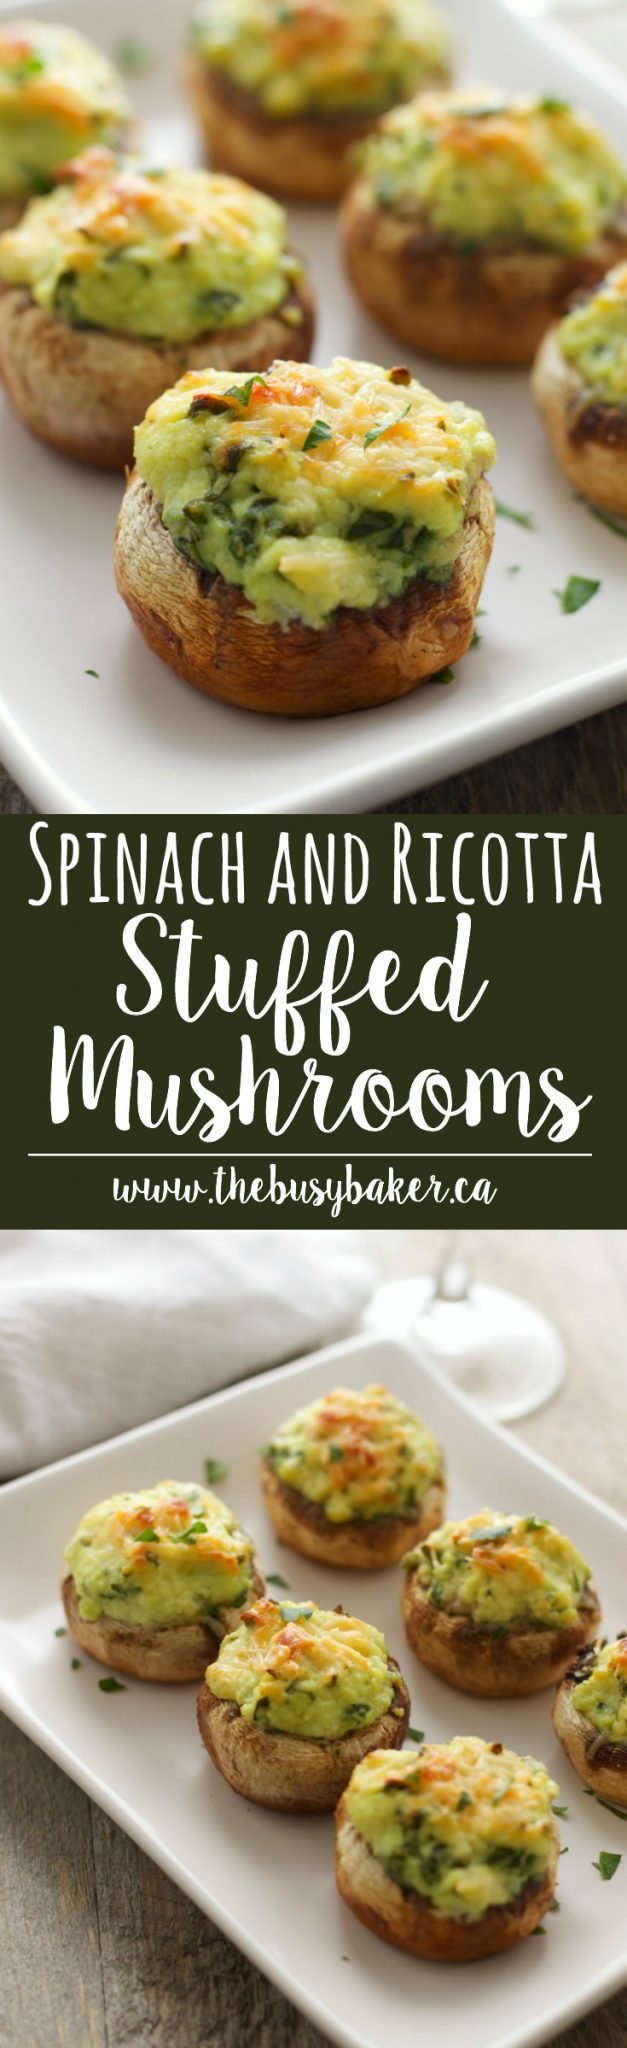 These Spinach and Ricotta Stuffed Mushrooms make the perfect one-bite snack or appetizer! They're packed with a decadently creamy ricotta cheese filling, fresh spinach, garlic and finished off with some parmesan! They're easy to make and great for a party! Recipe from thebusybaker.ca! #stuffedmushrooms #easystuffedmushrooms #spinachandricotta #stuffedmushroomsappetizer via @busybakerblog